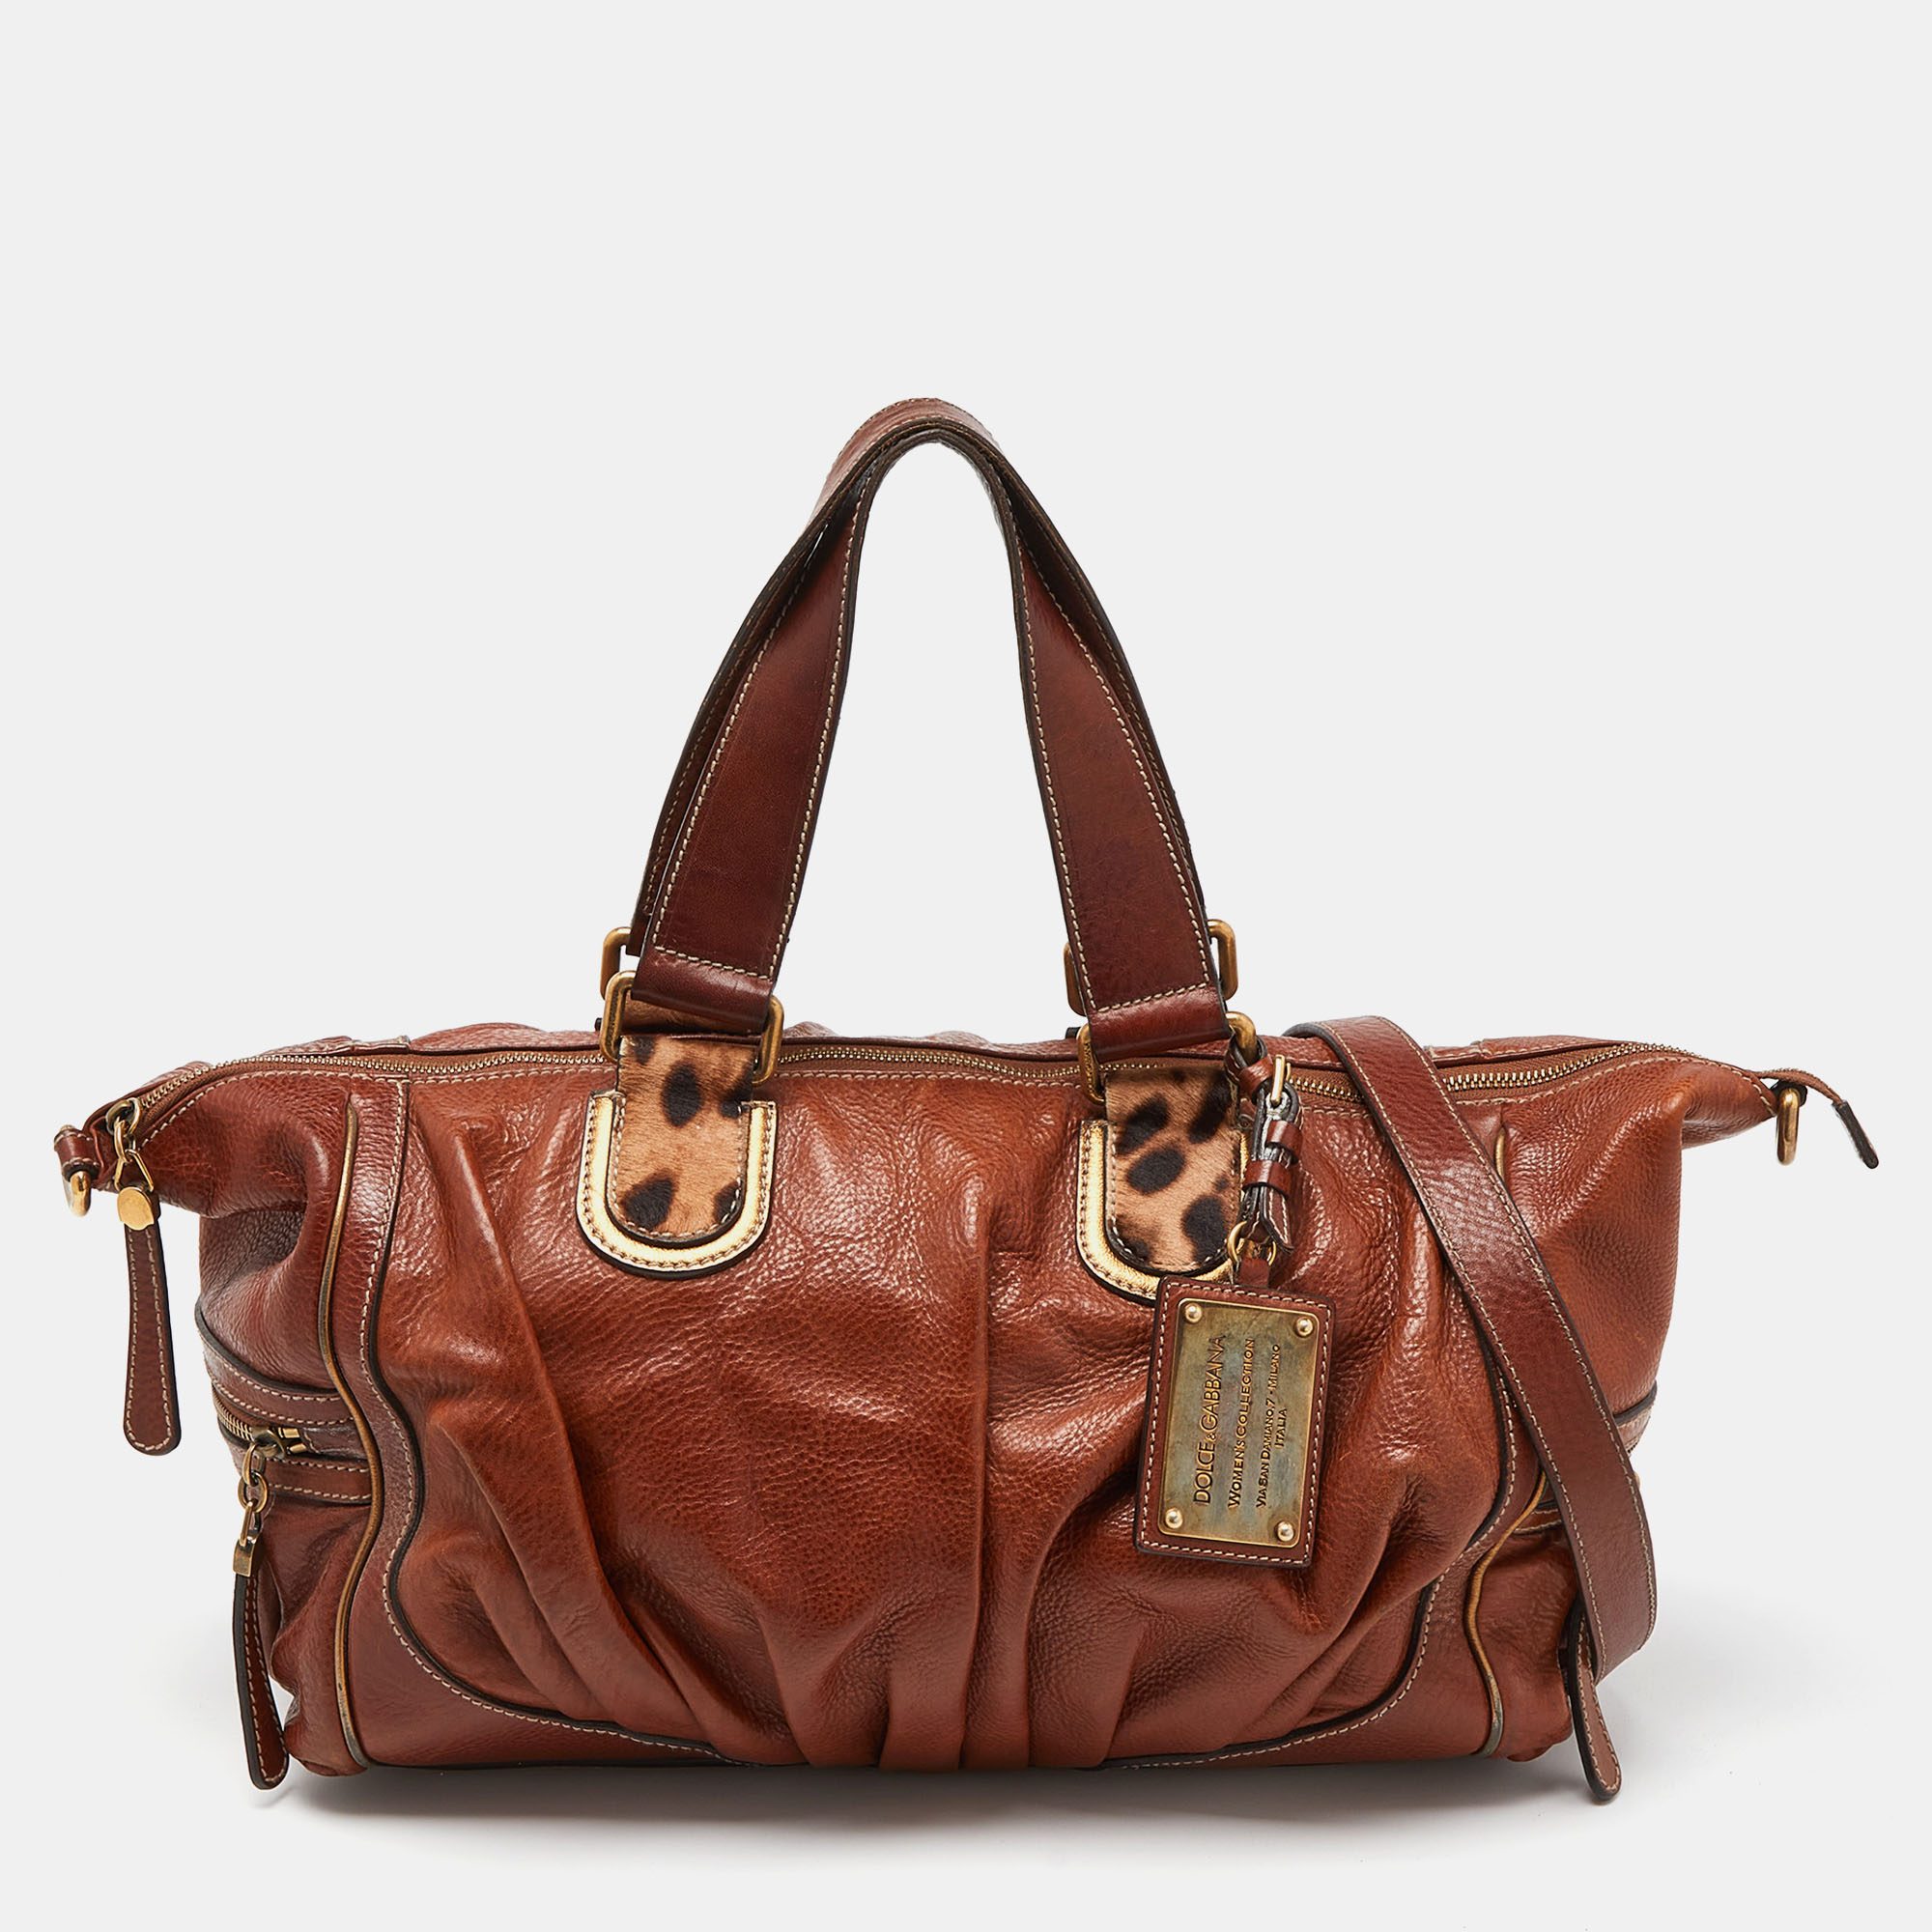 

Dolce & Gabbana Brown Leather and Calfhair Satchel